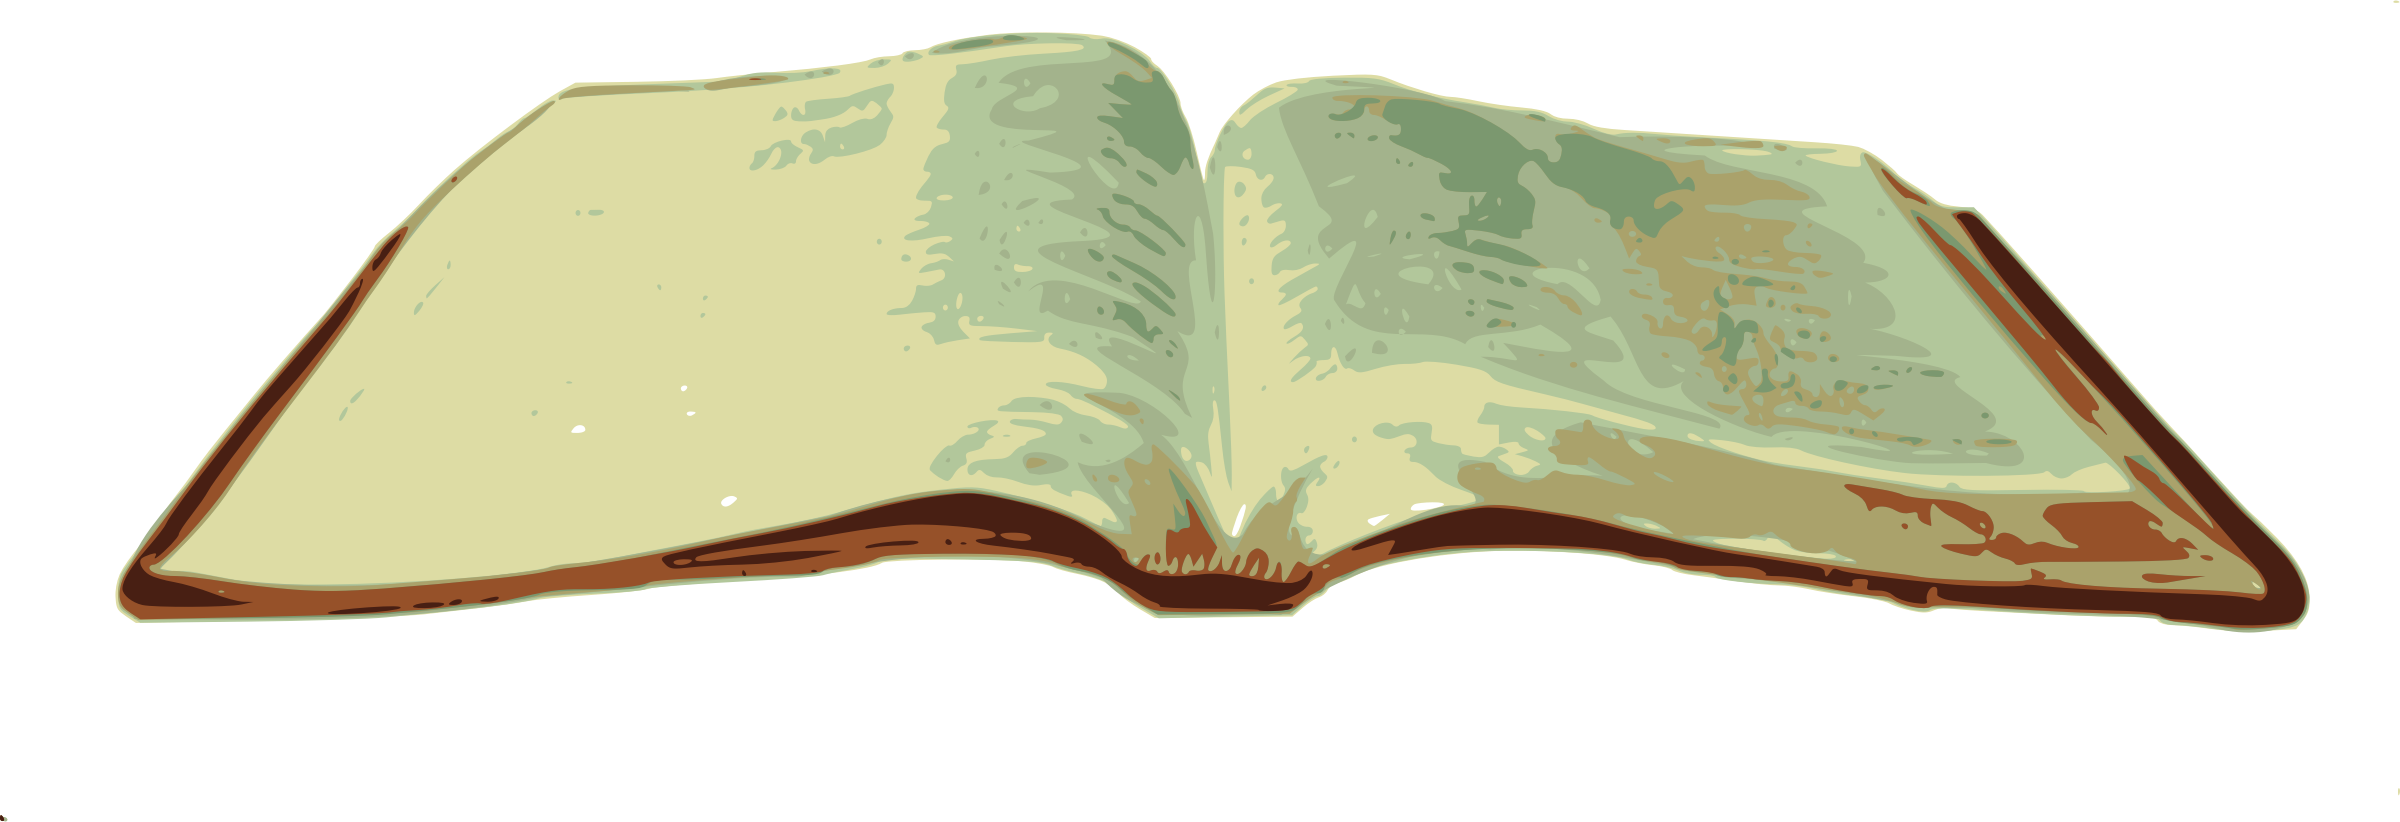 Open Bible Illustration PNG